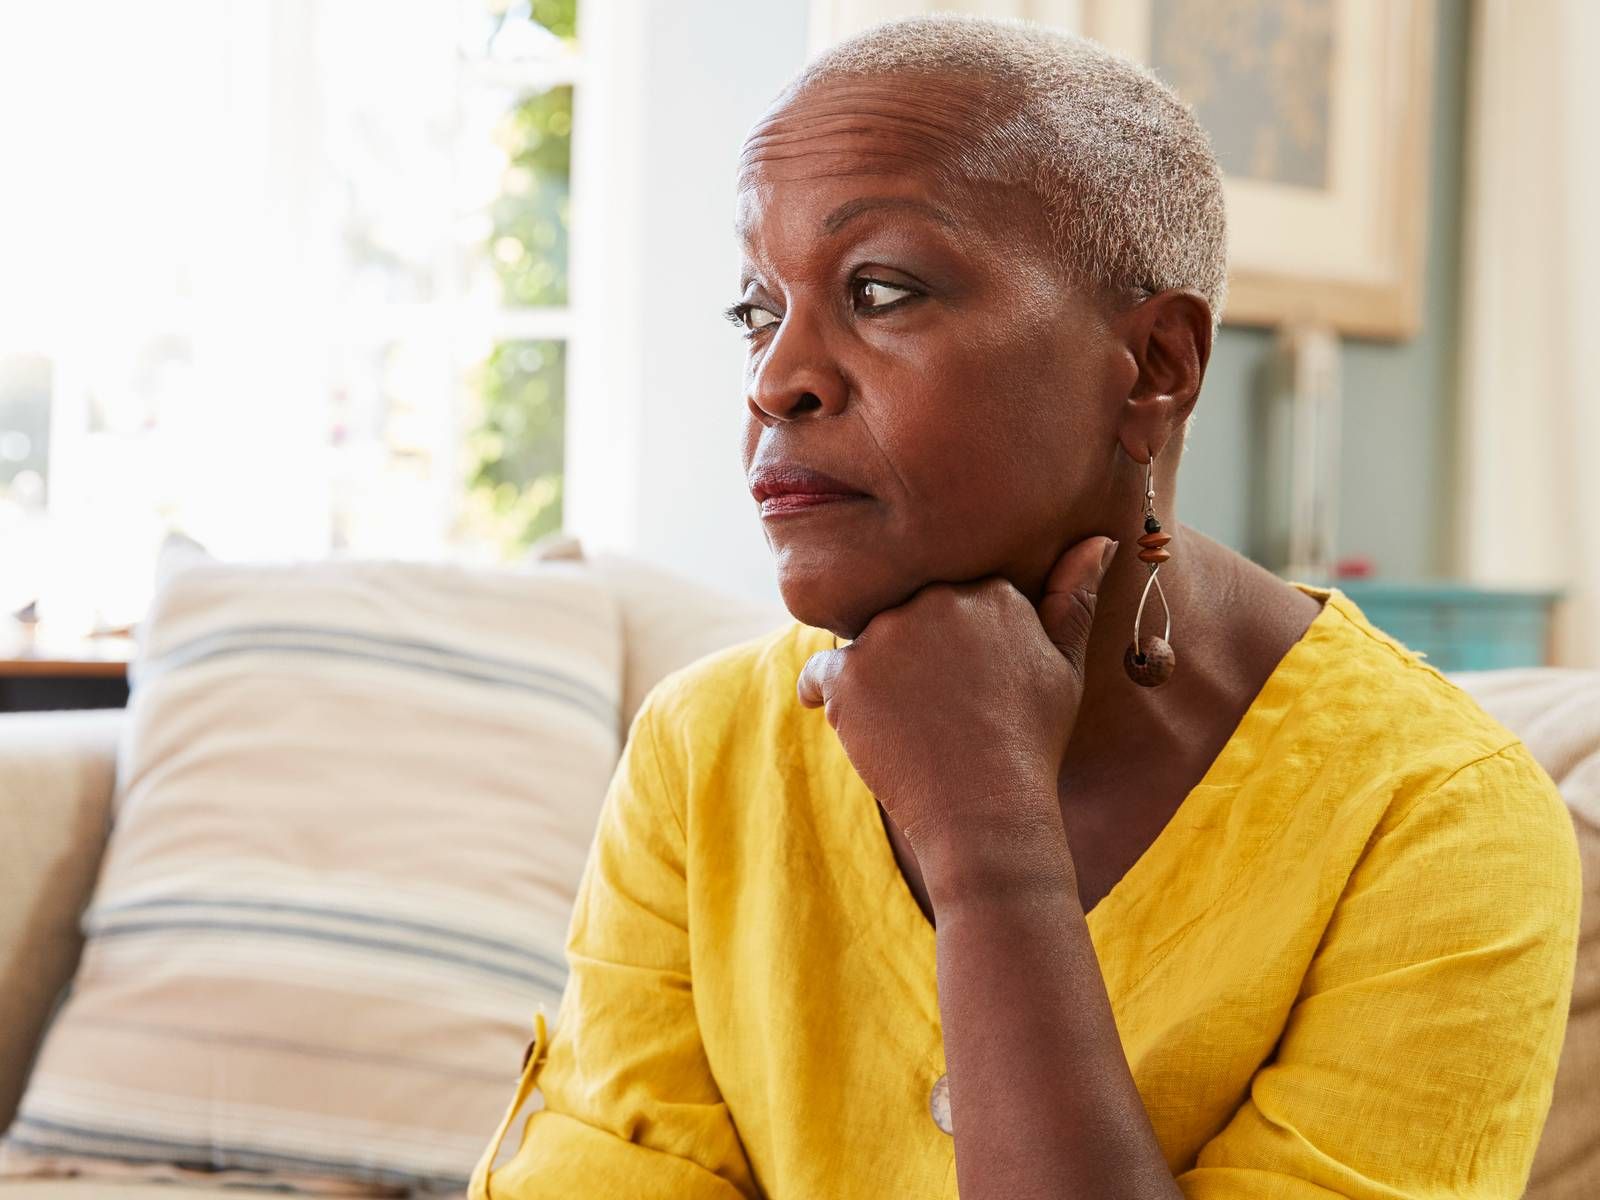 Advice from an expert can help you manage the grieving process. GETTY